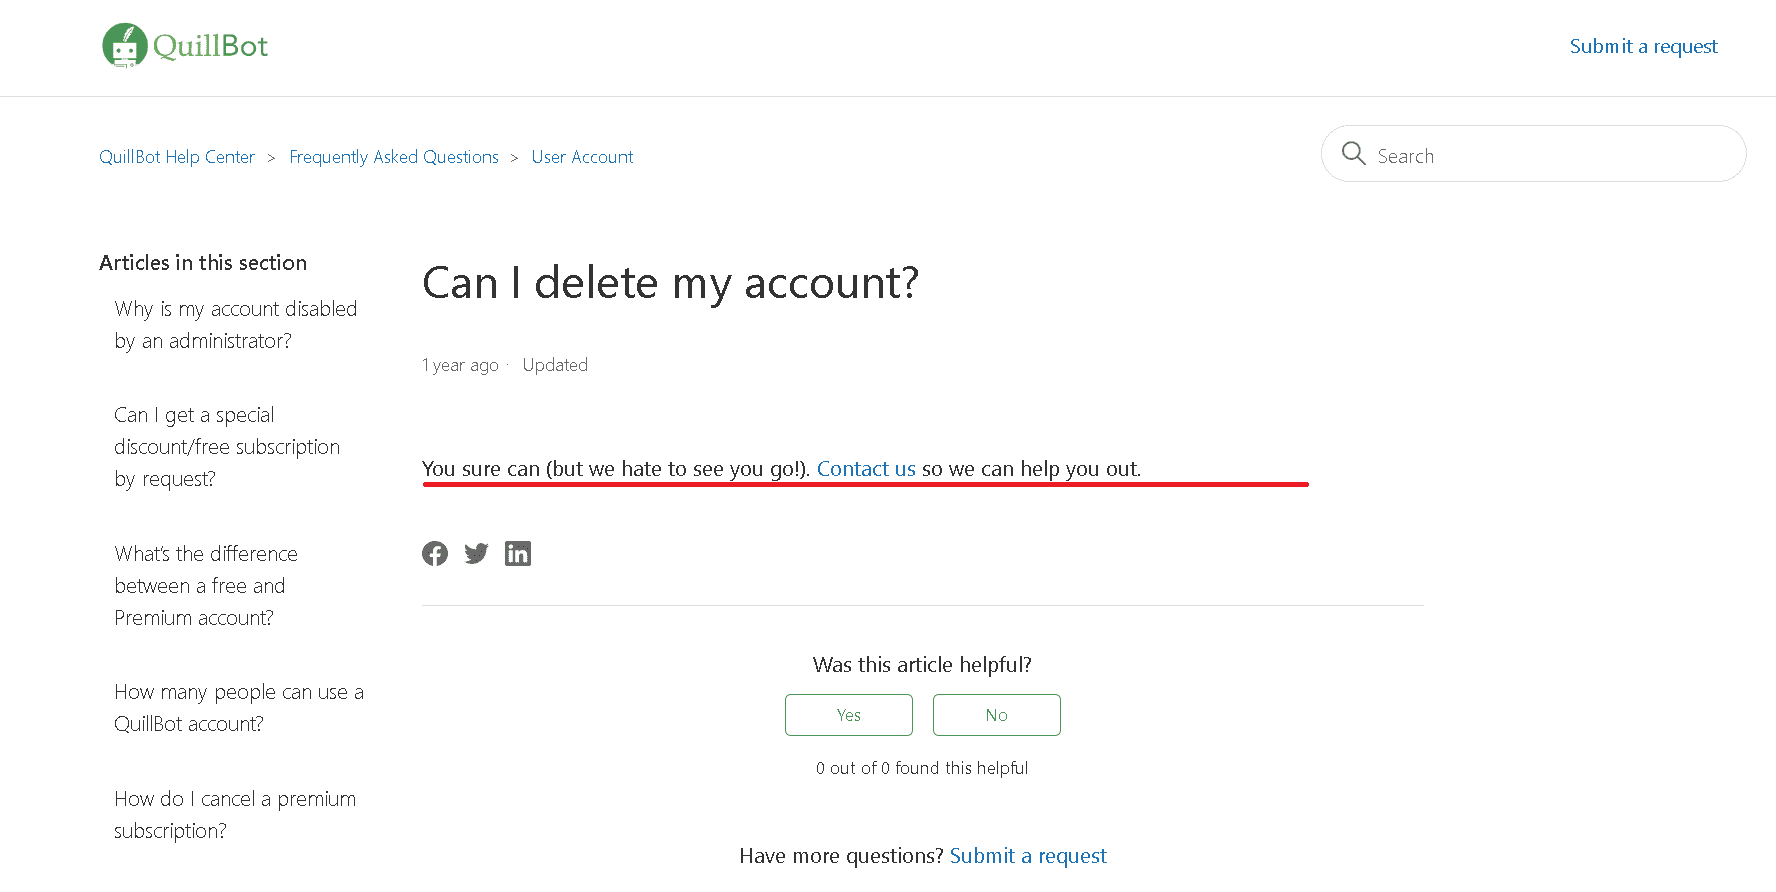 How to completely delete a Quillbot account- you need to contact Quillbot support